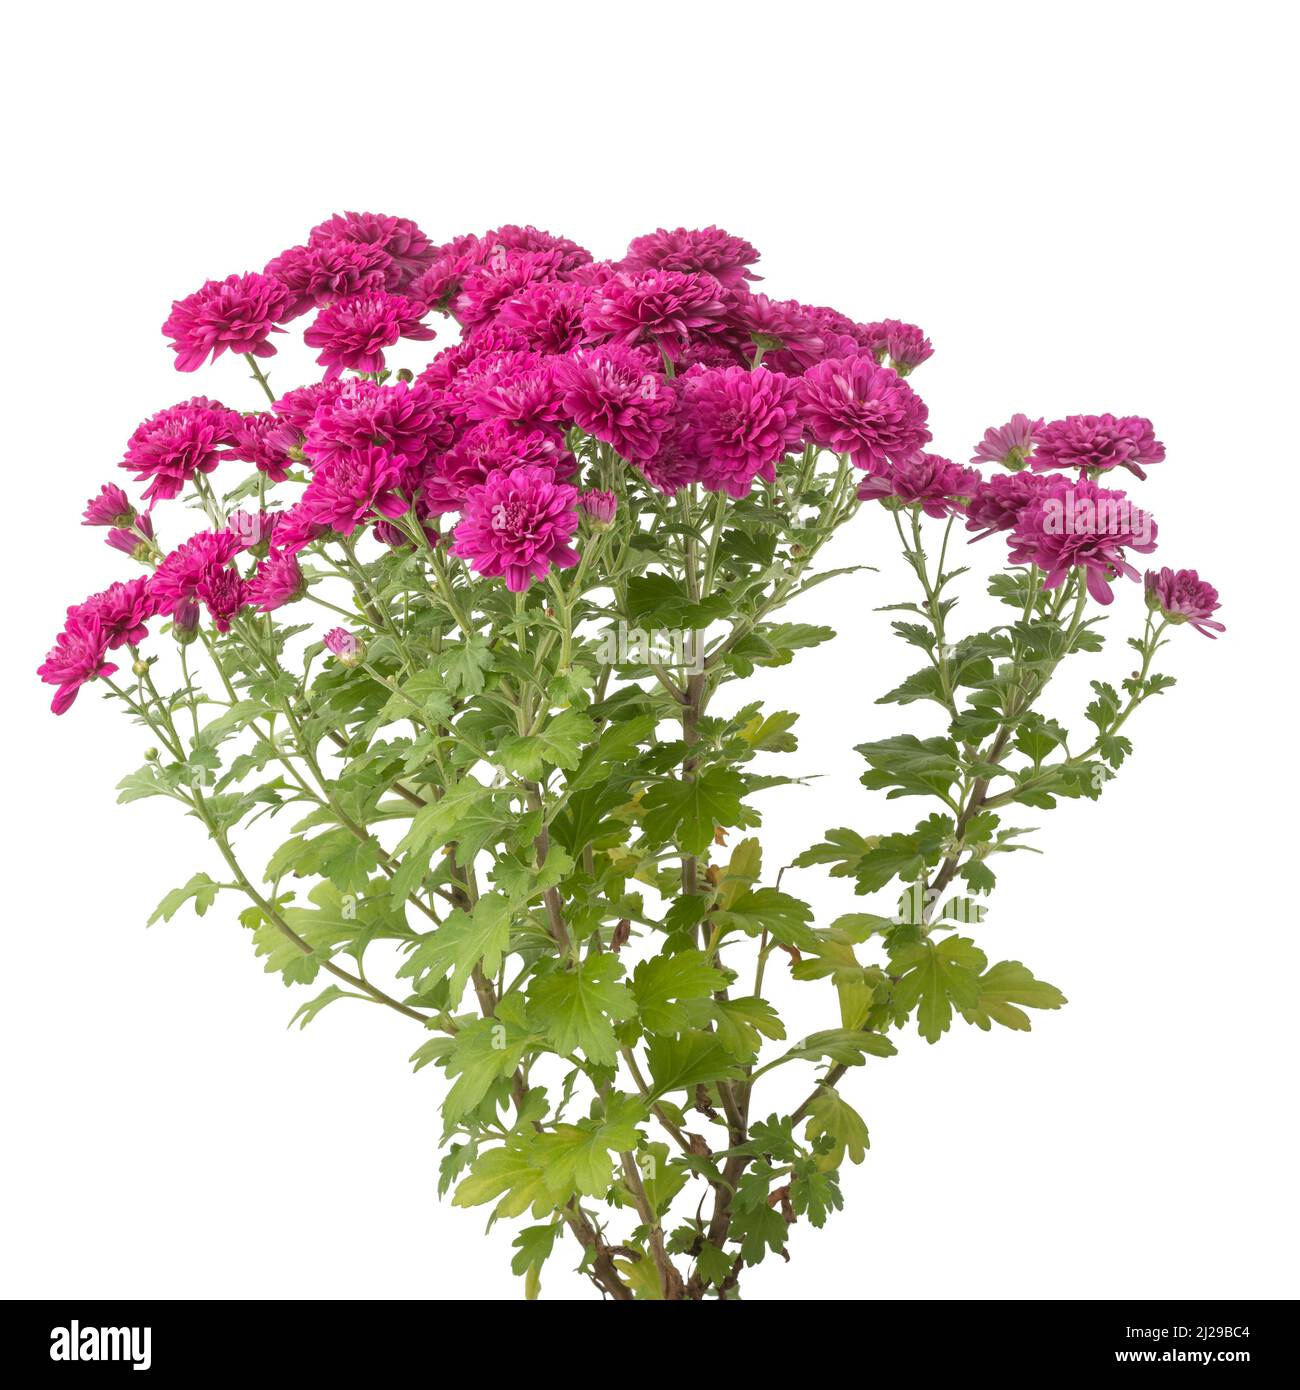 bunch of pink chrysanthemum flowers on white background, isolated flowering plant Stock Photo